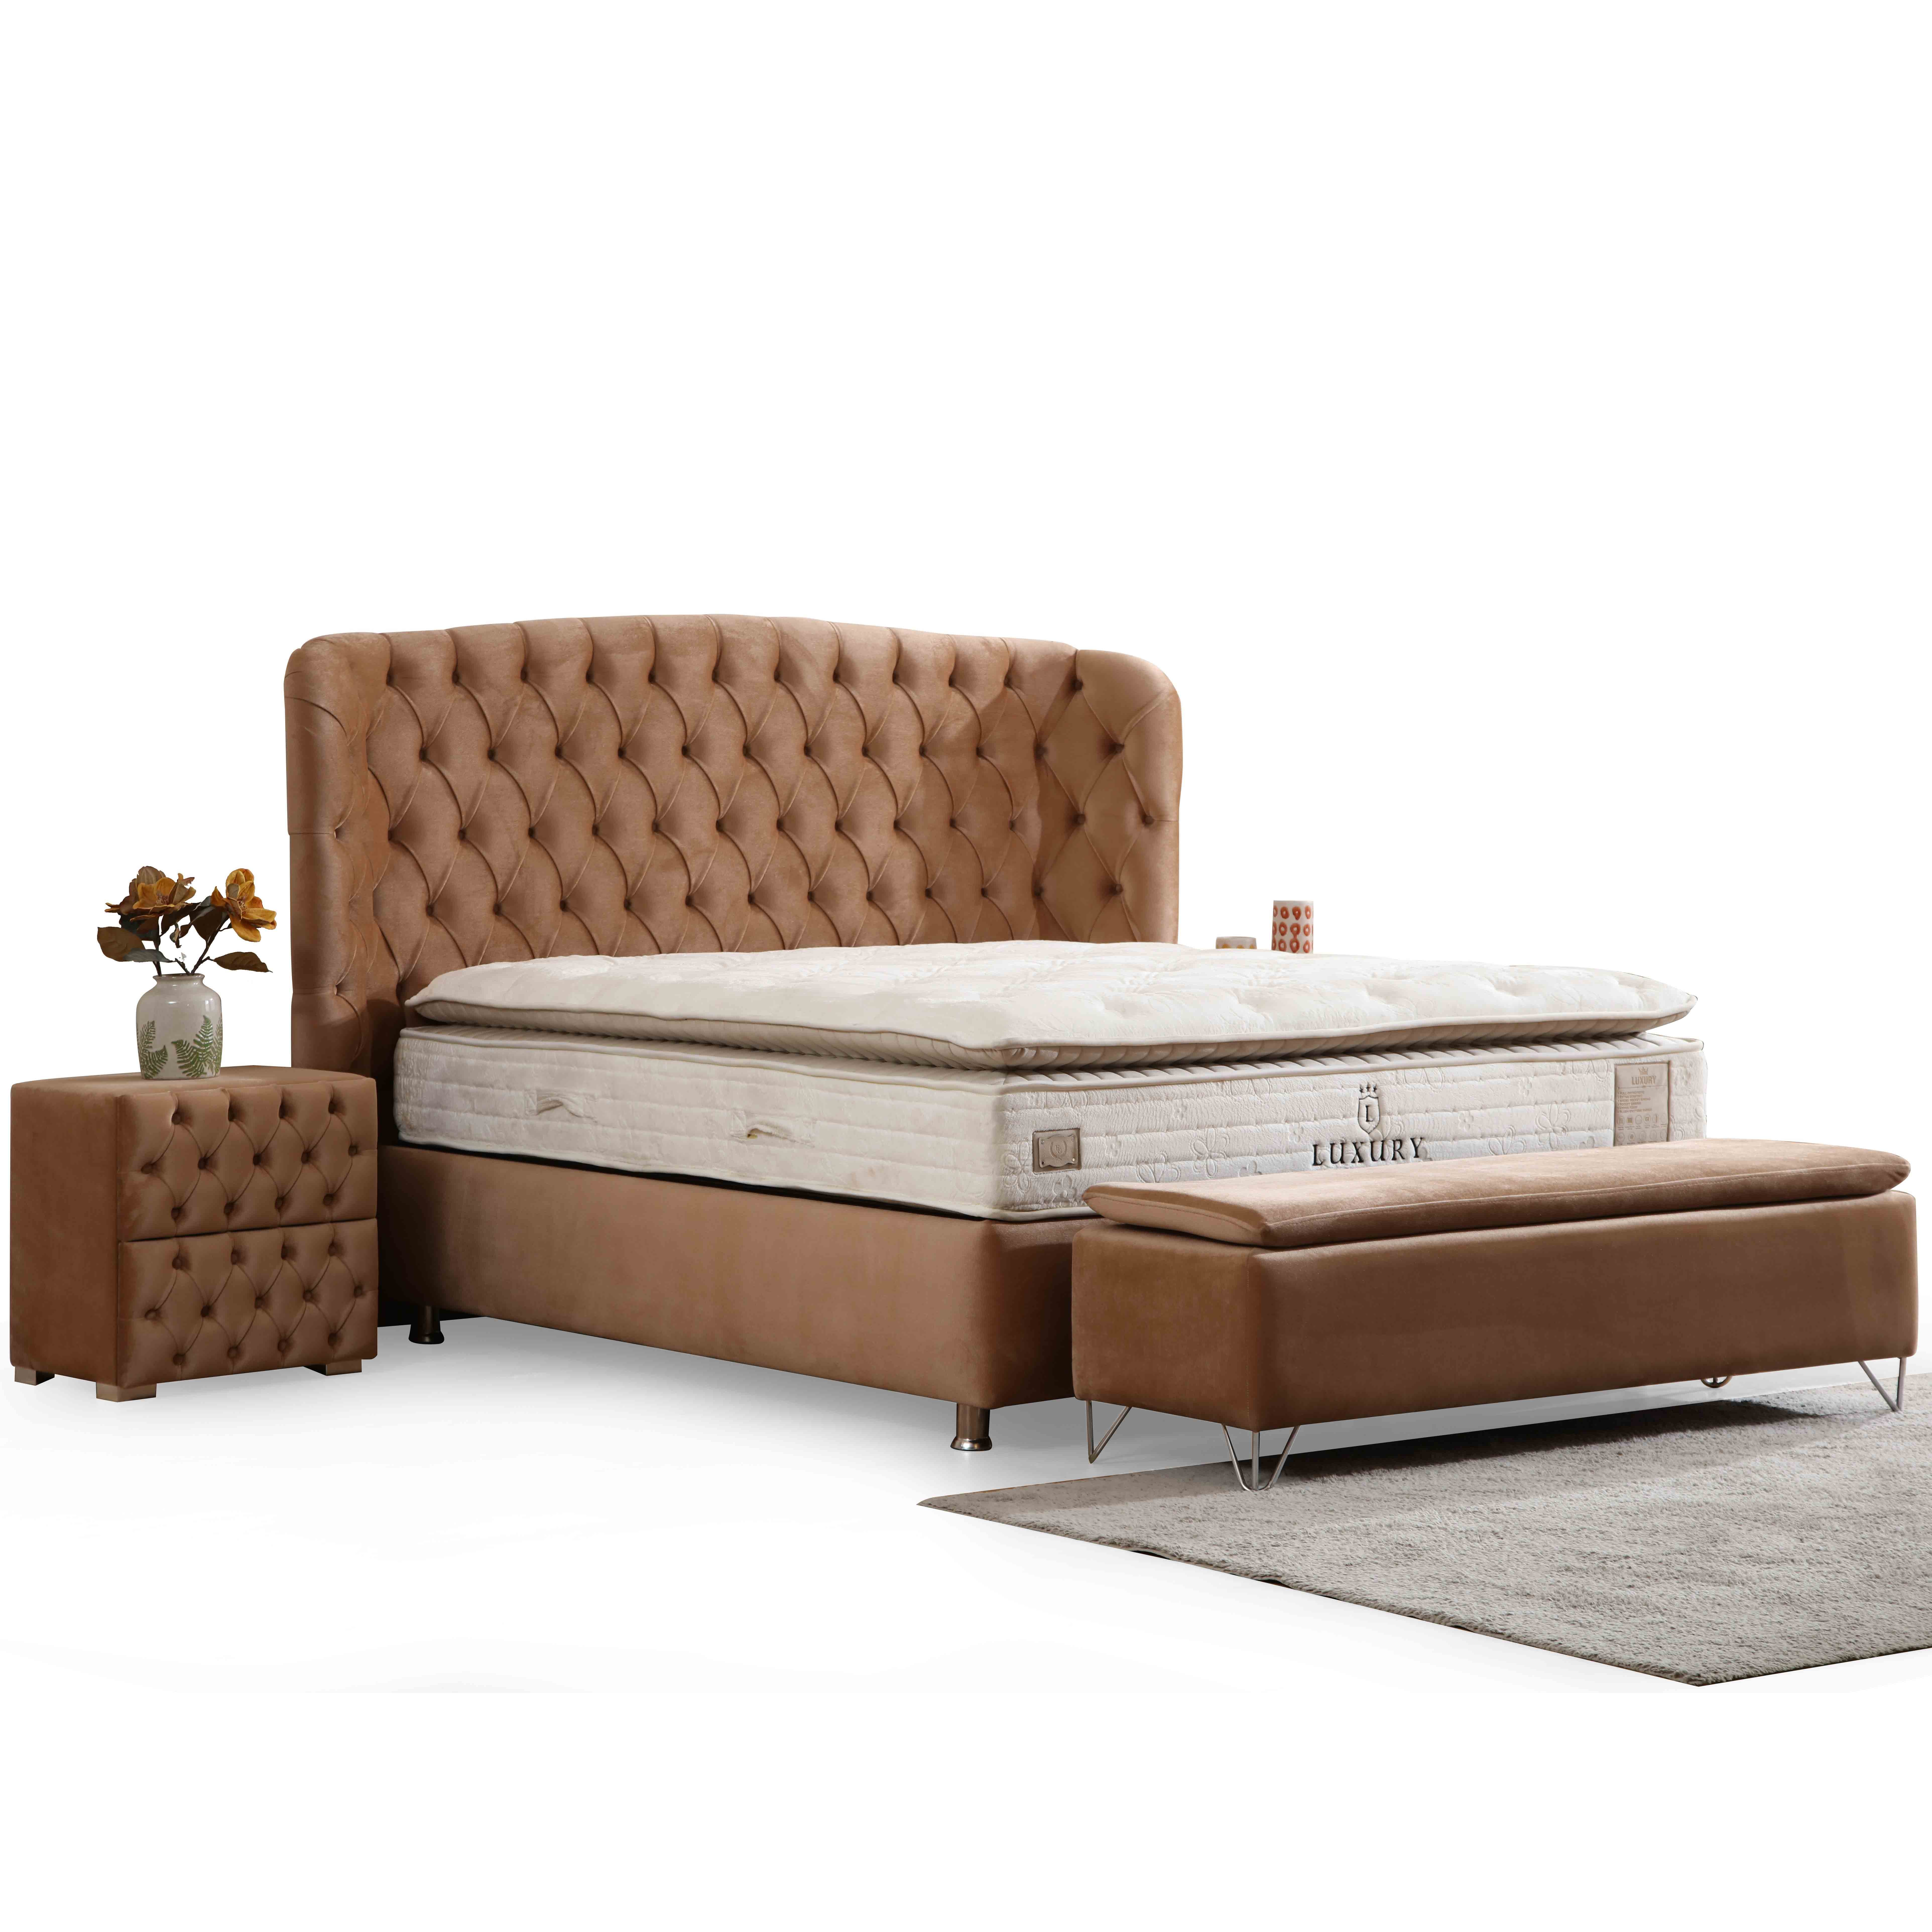 Riva Bed With Storage 160x200 cm